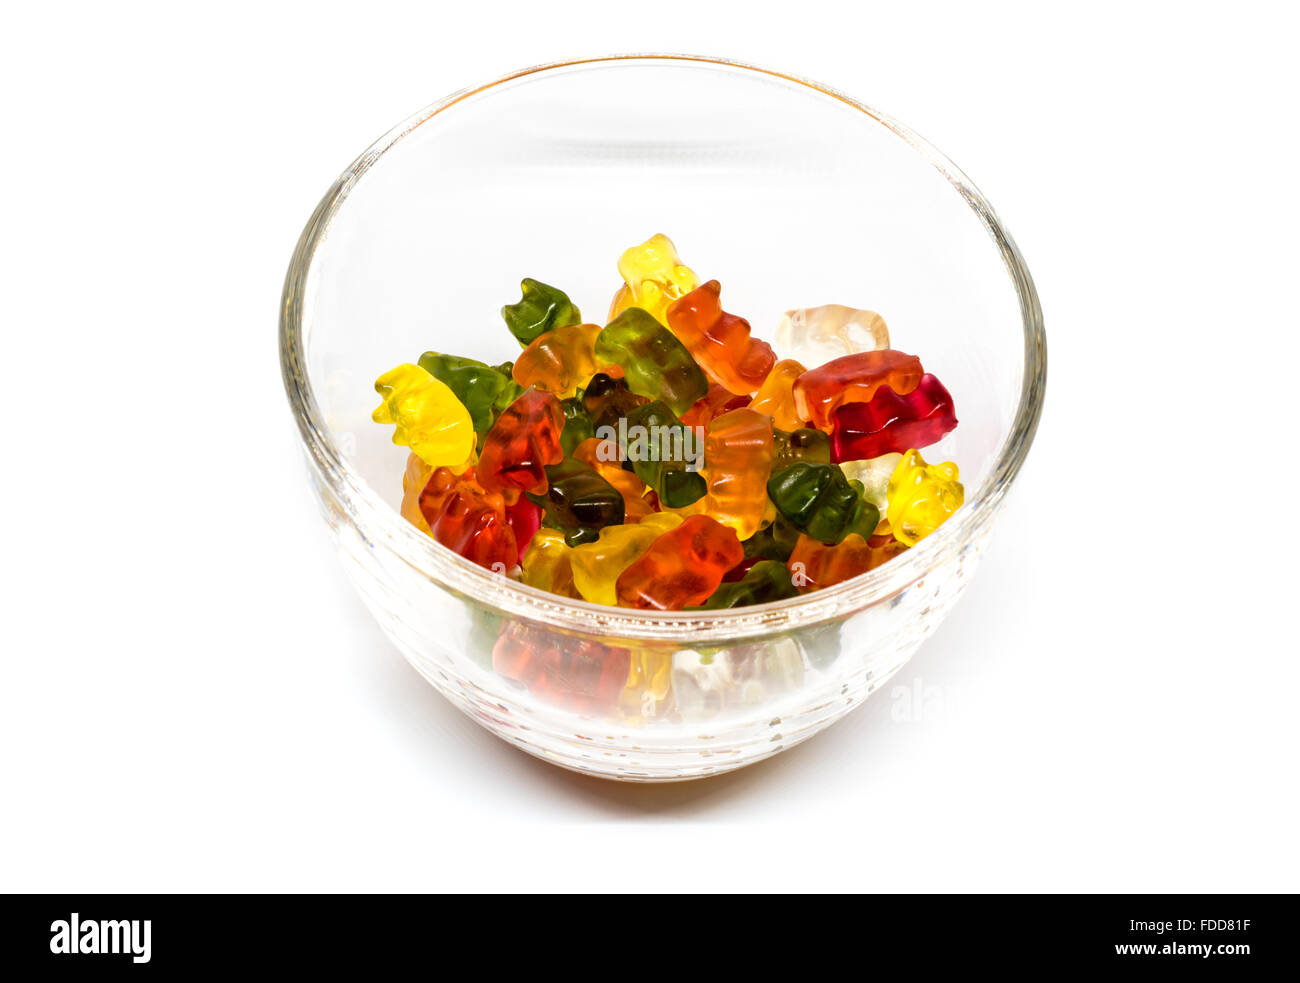 gummy bear candies in a glass bowl Stock Photo